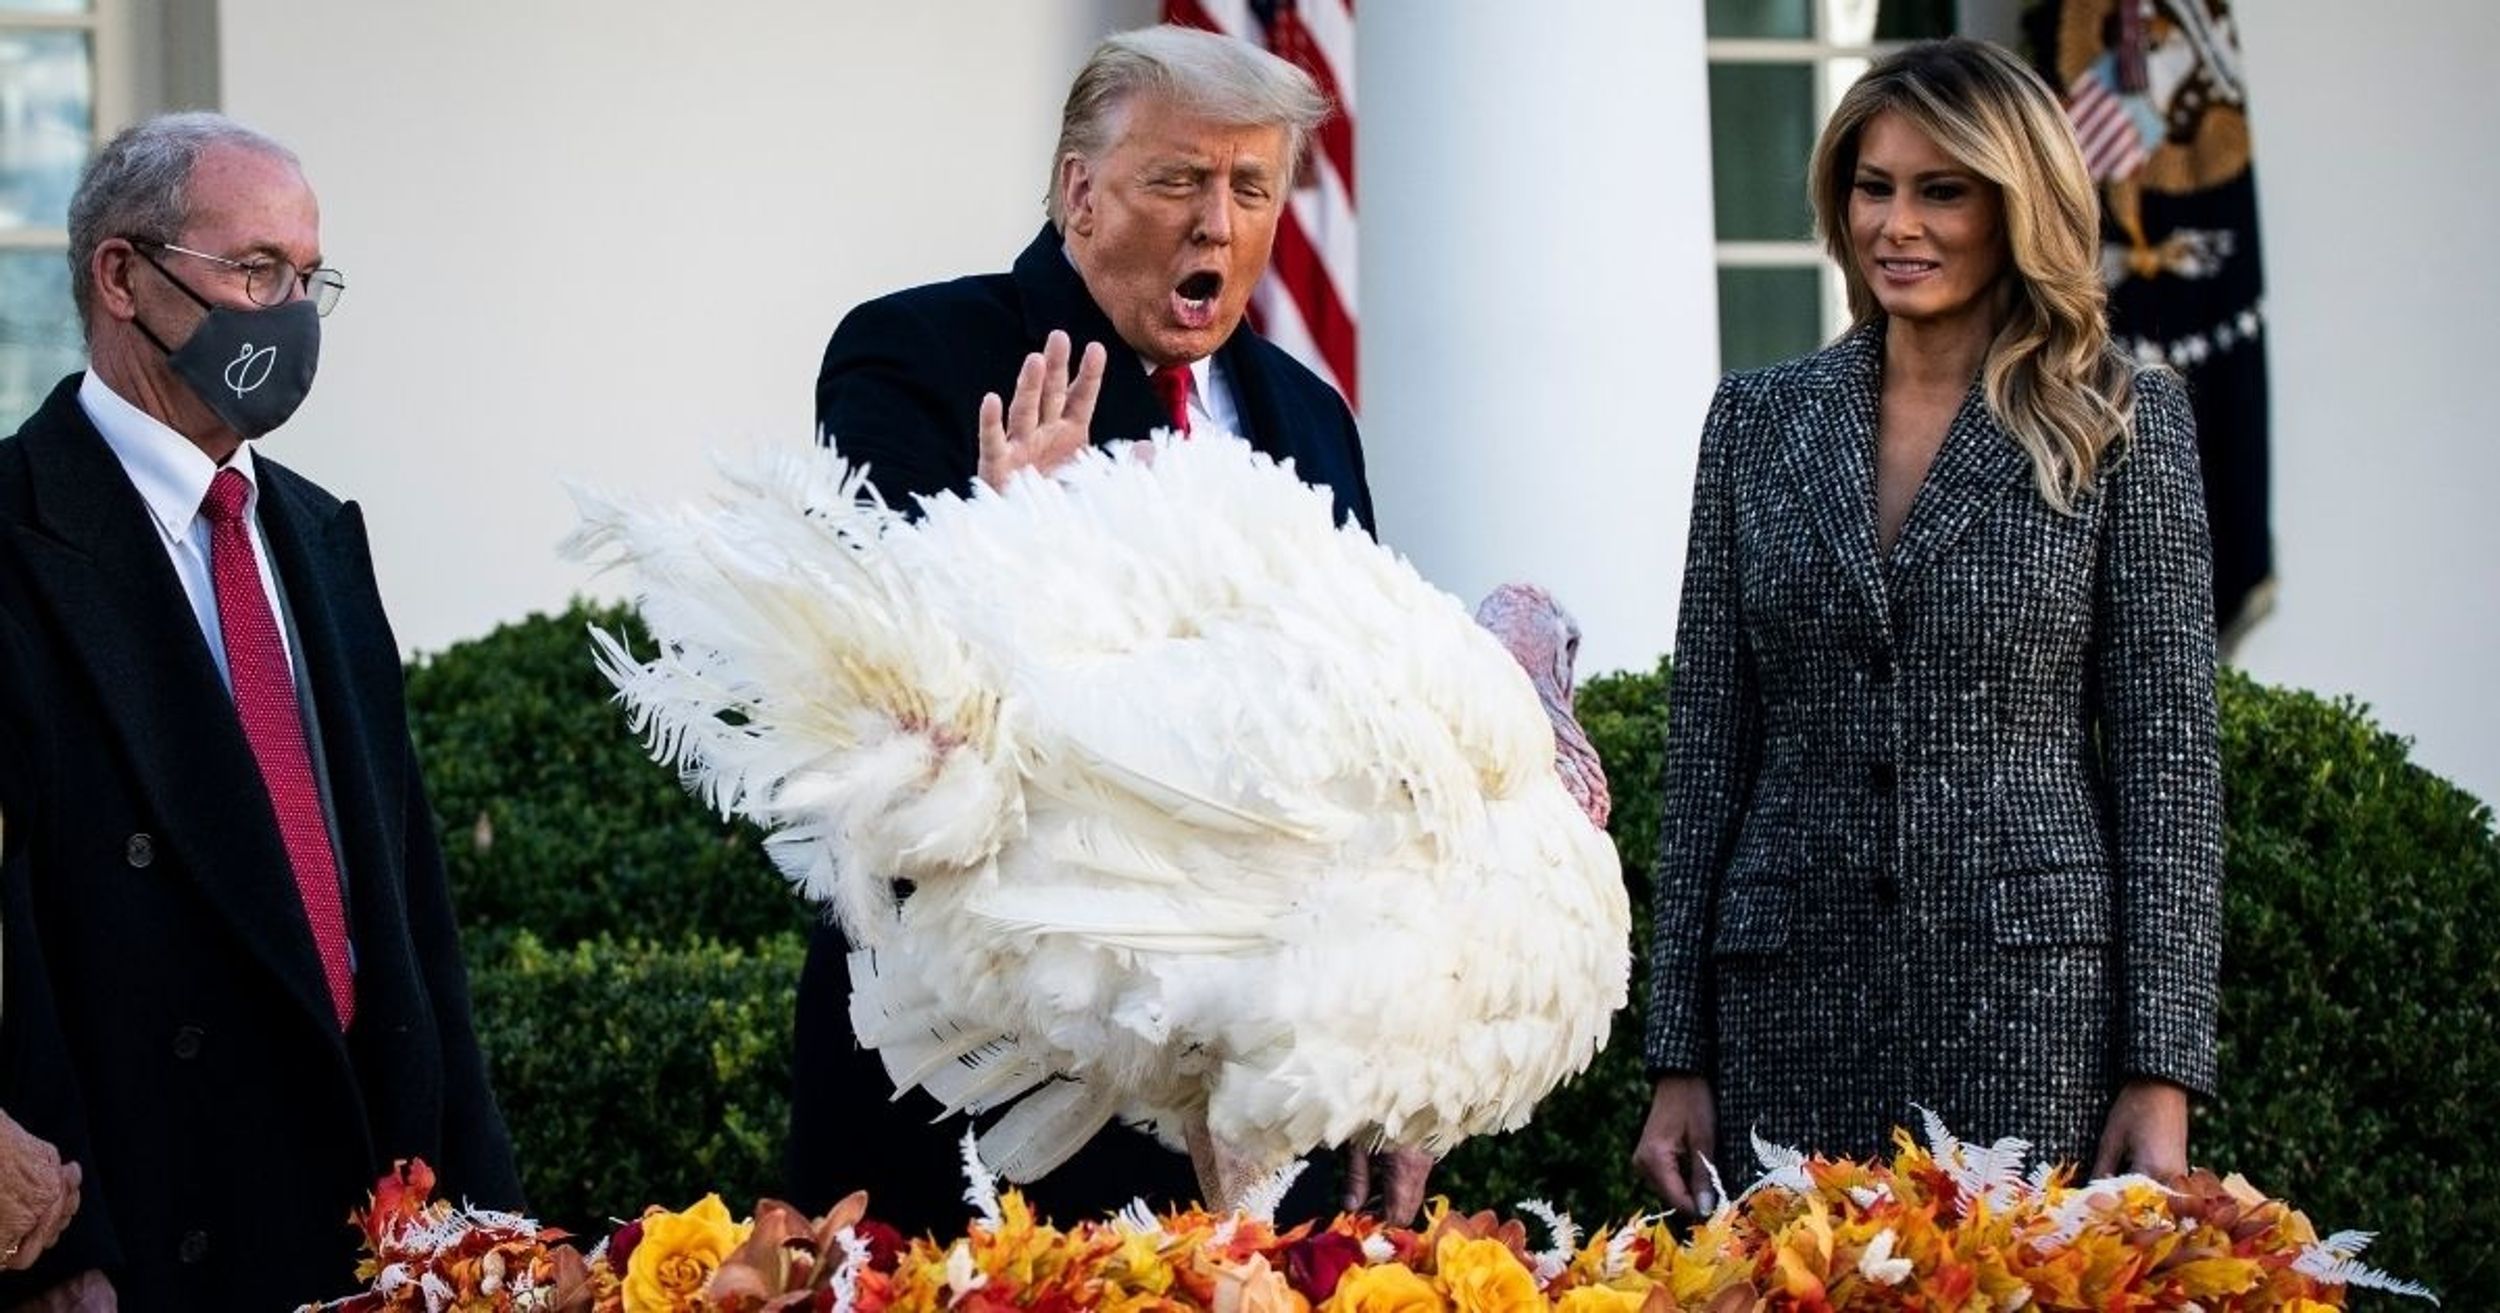 Awkward Photo Of Trump's Turkey Pardon Sparks A Hilarious Photoshop Battle—And We're Gobbling It Up